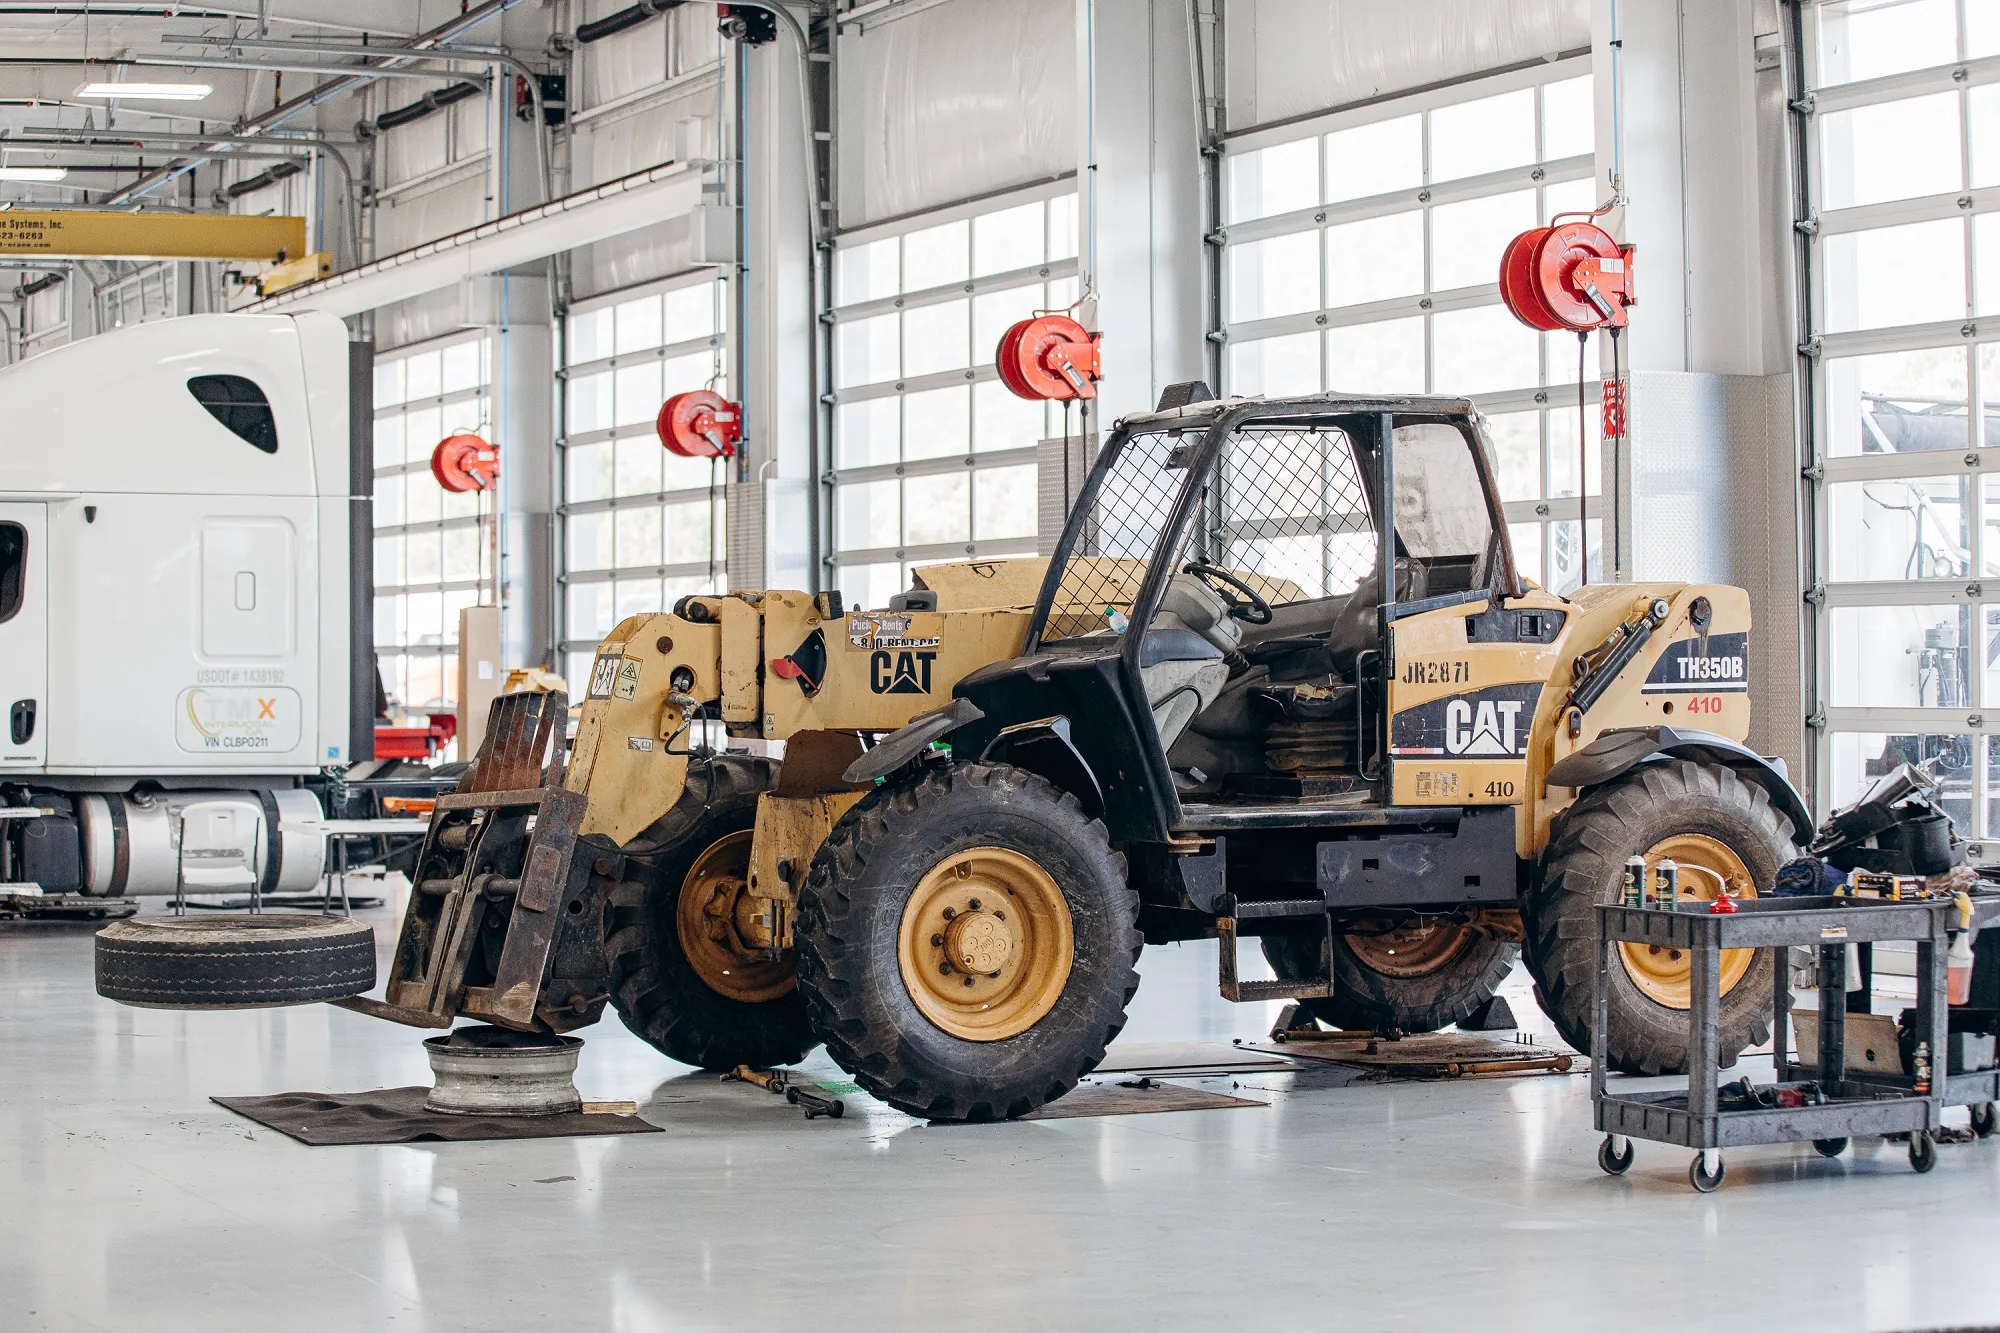 Skid Steer Repair Shop: Service for Heavy Equipment at Asheville, NC